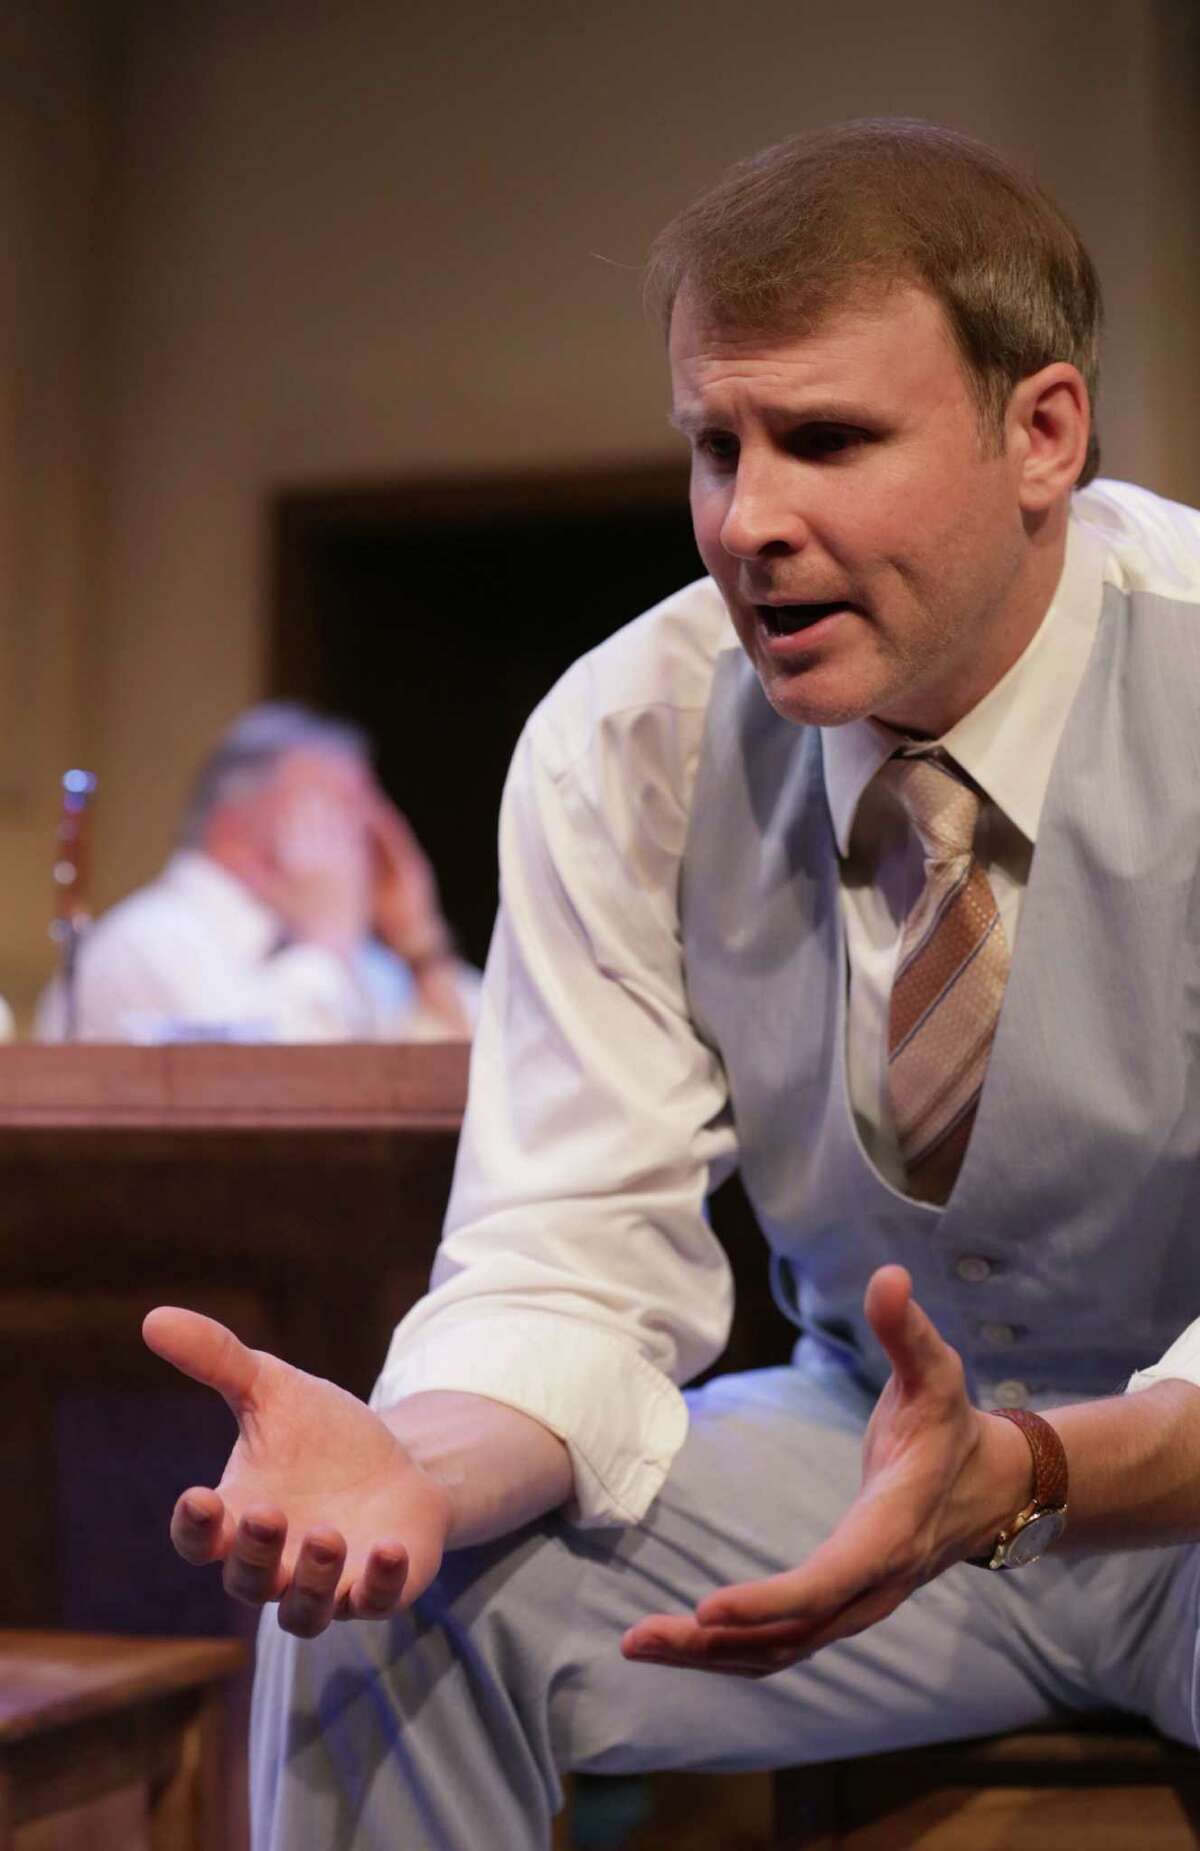 Kevin Dean performs as Juror 8 during a scene from "12 Angry Men," performed at A. D. Players, Wednesday, Aug. 26, 2015, in Houston. ( Jon Shapley / Houston Chronicle )